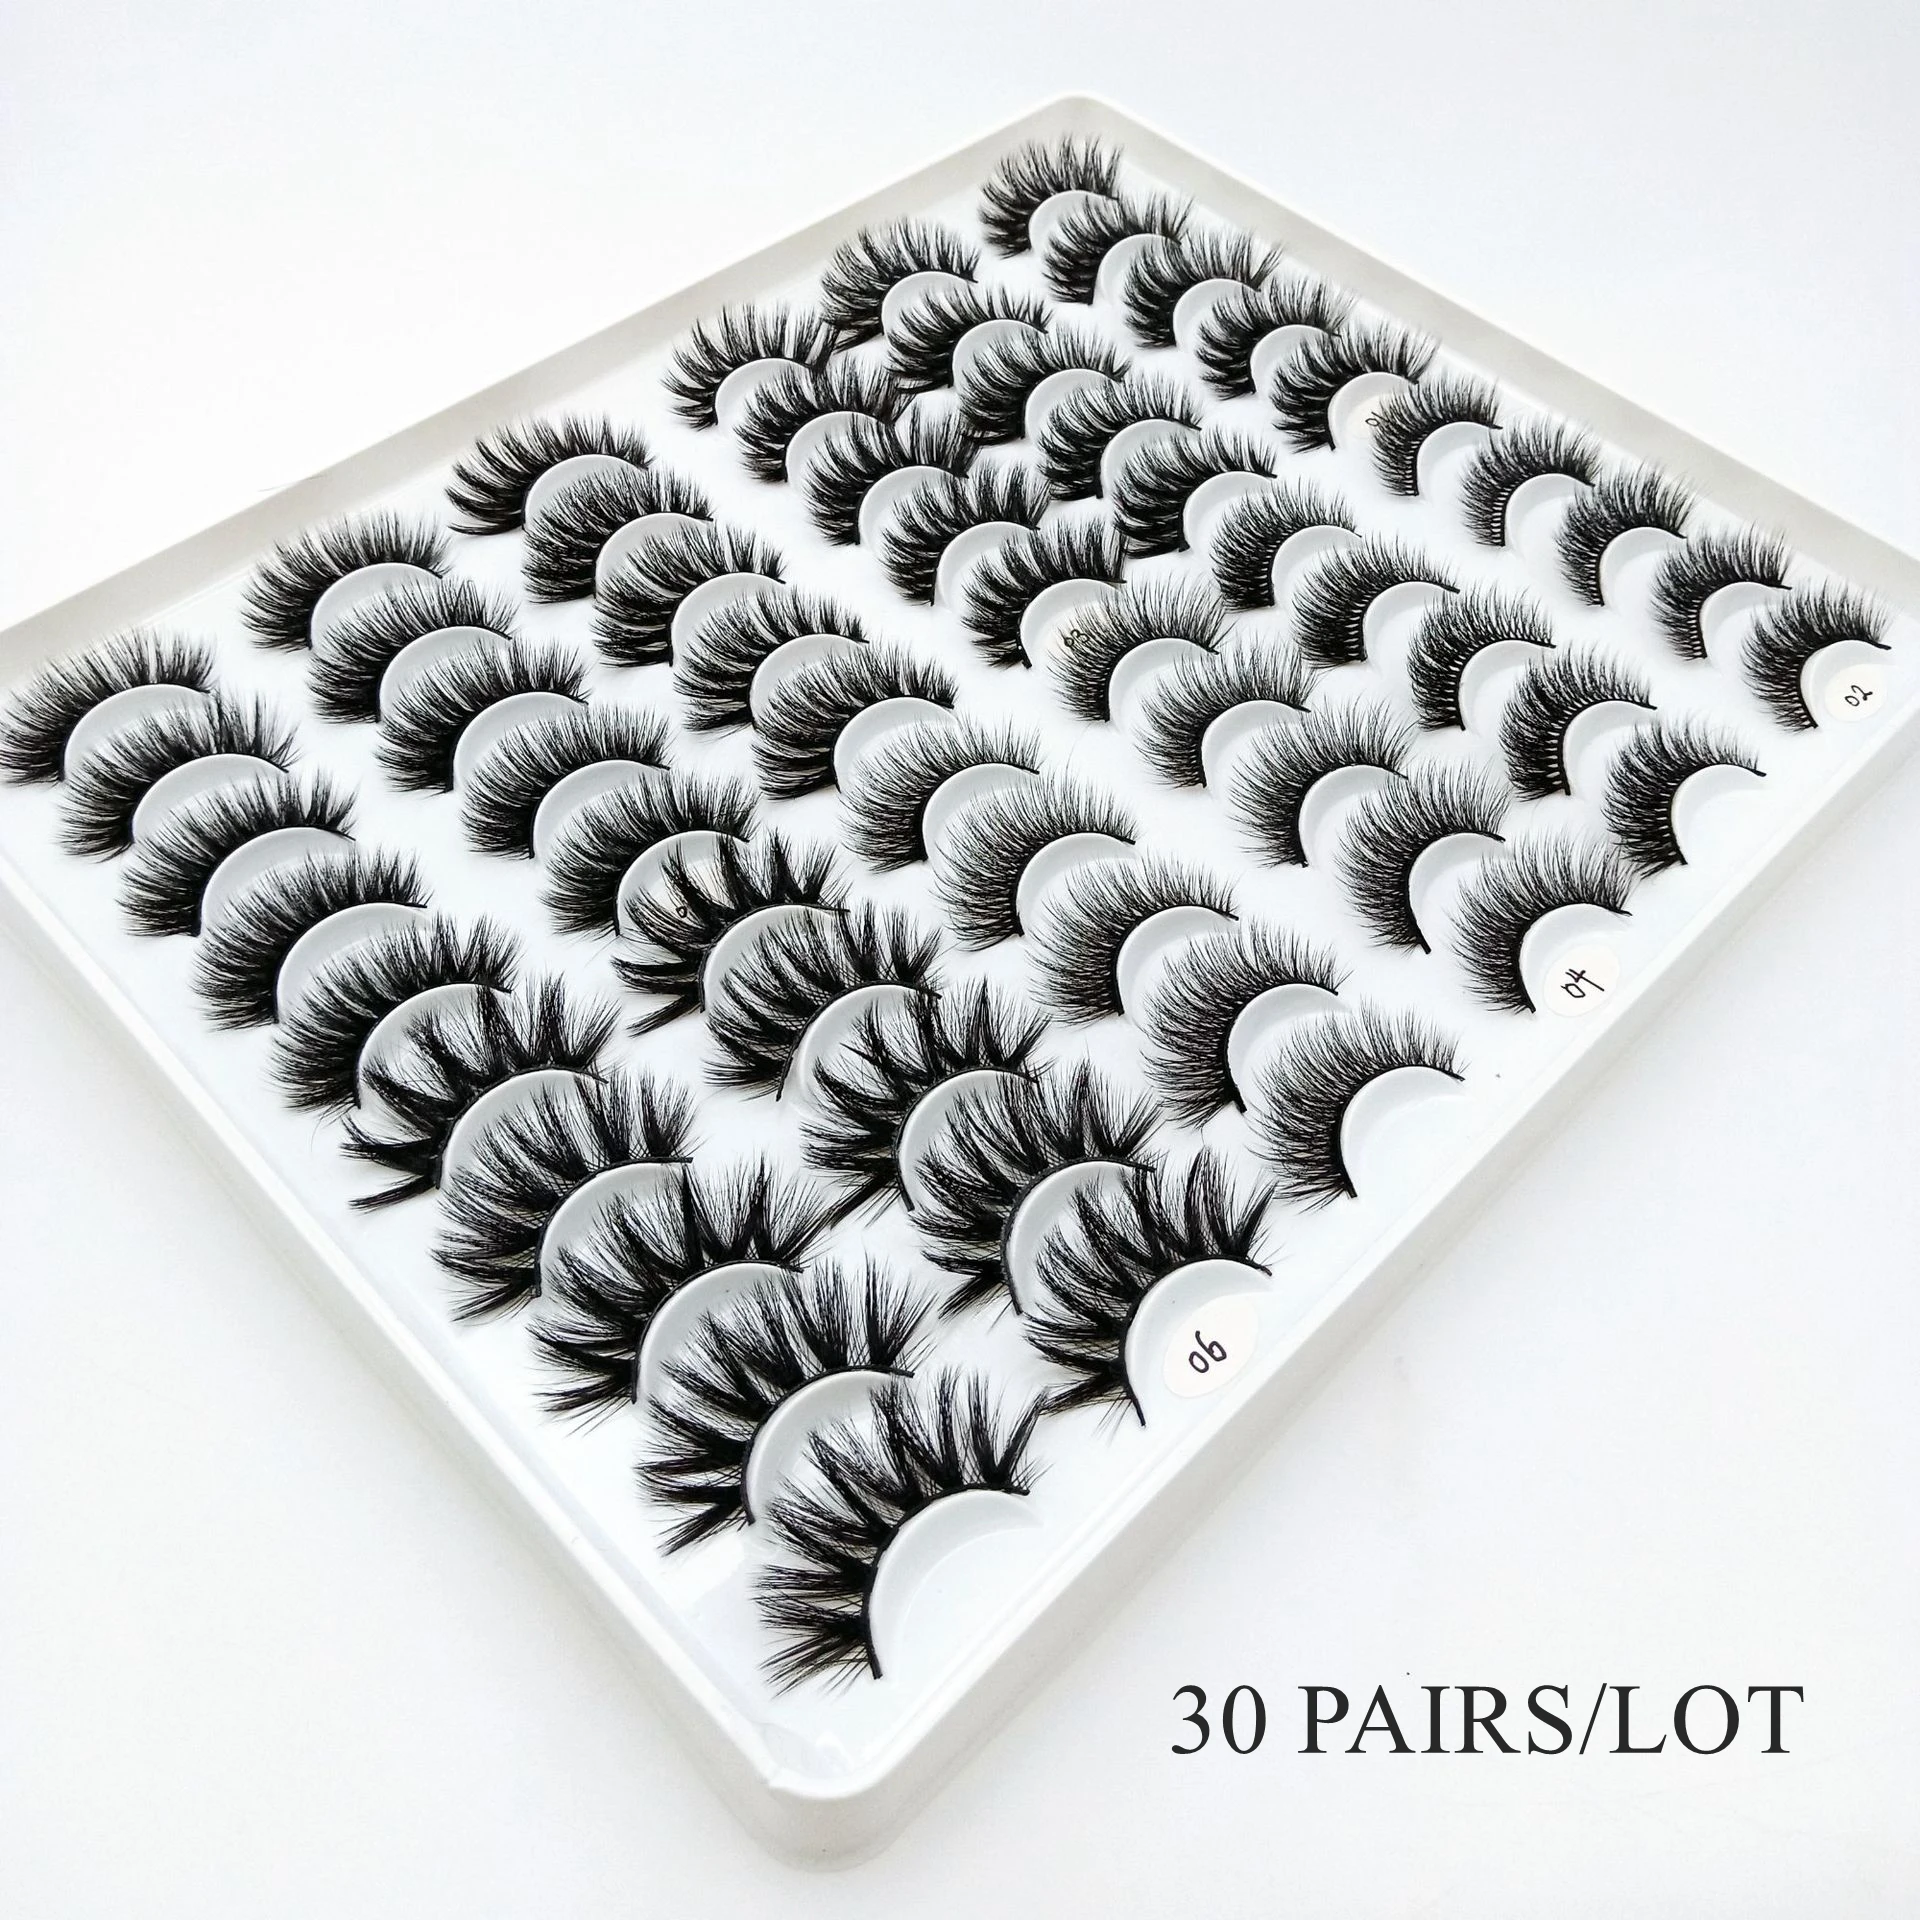 3D Mink Lashes Pack 7/20/30 Pairs Messy Fluffy Long Faux Cils Packaging wholesale in bulk,Mix Dramatic Natrual Mink Eyelashes